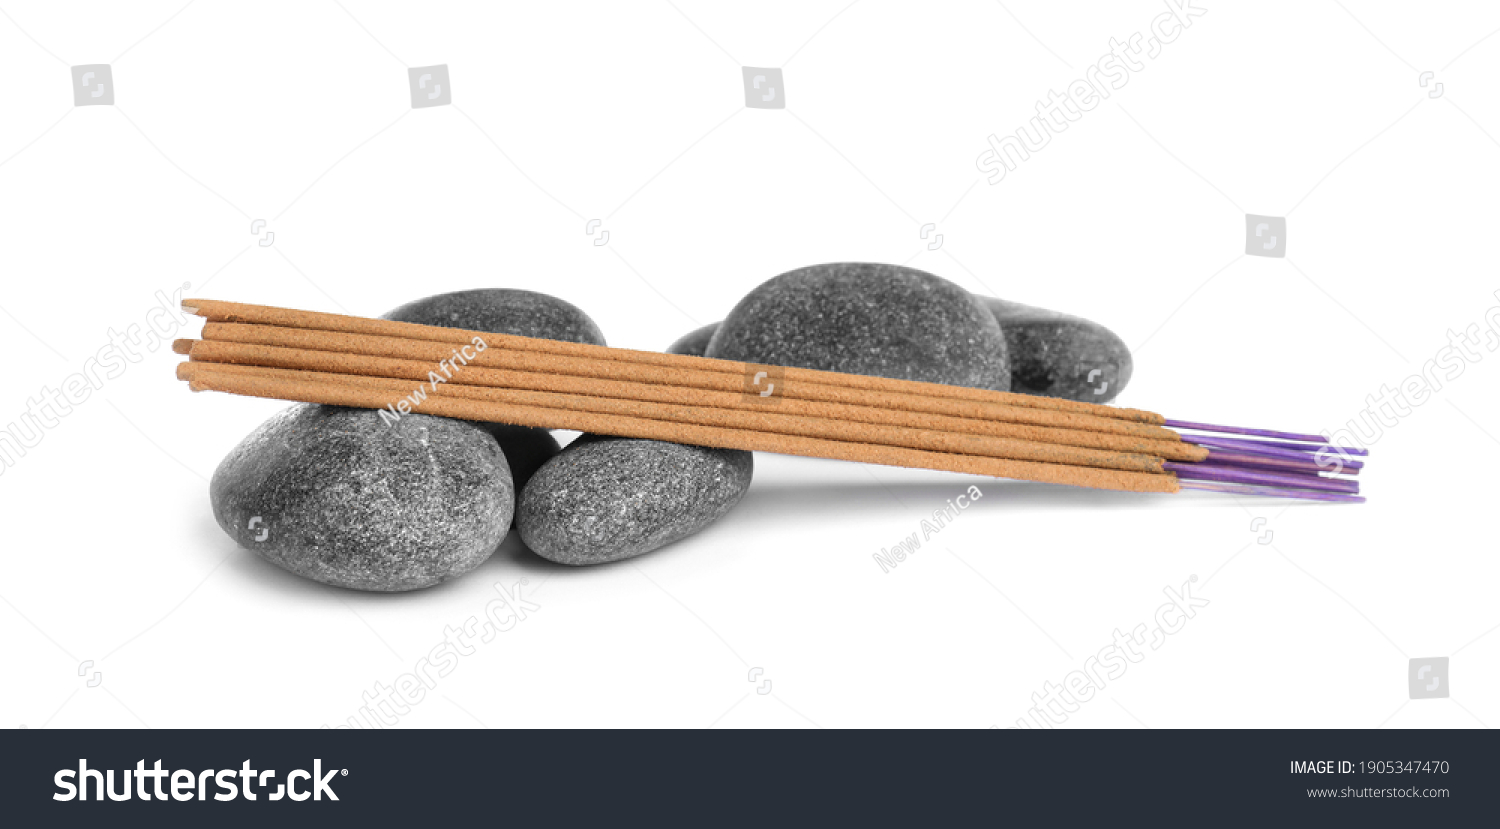 Aromatic incense sticks and spa stones on white background #1905347470